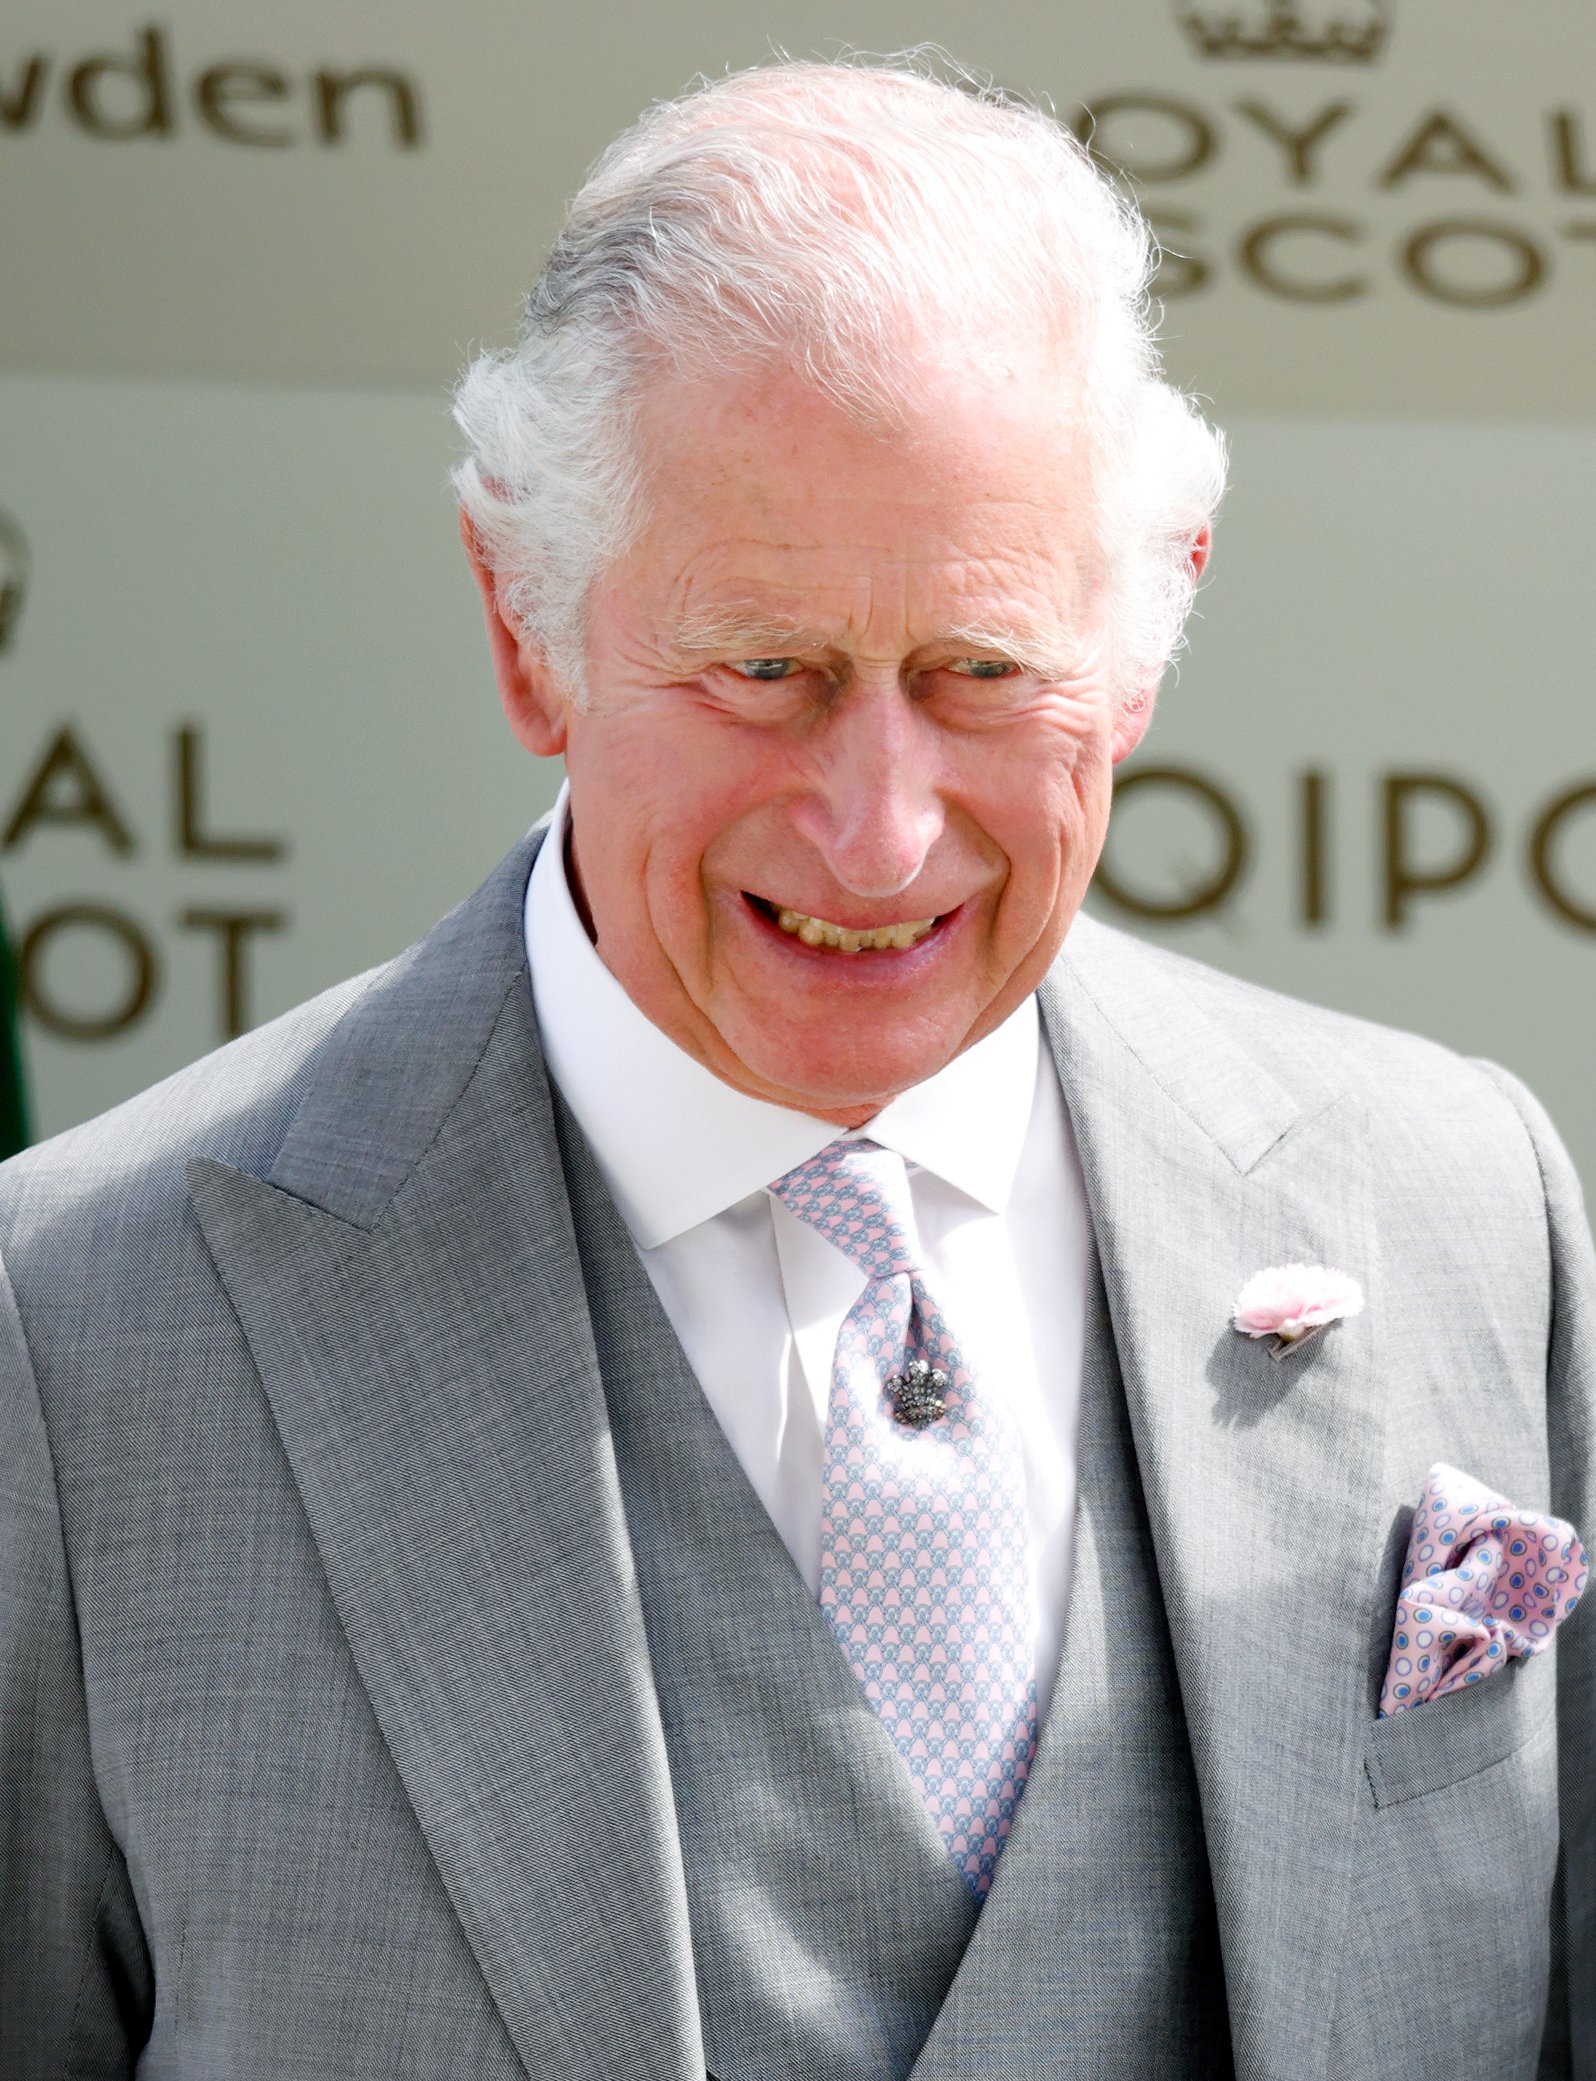 Prince Charles, Prince of Wales attends day 2 of Royal Ascot at Ascot Racecourse on June 15, 2022 in Ascot, England. | Source: Getty Images